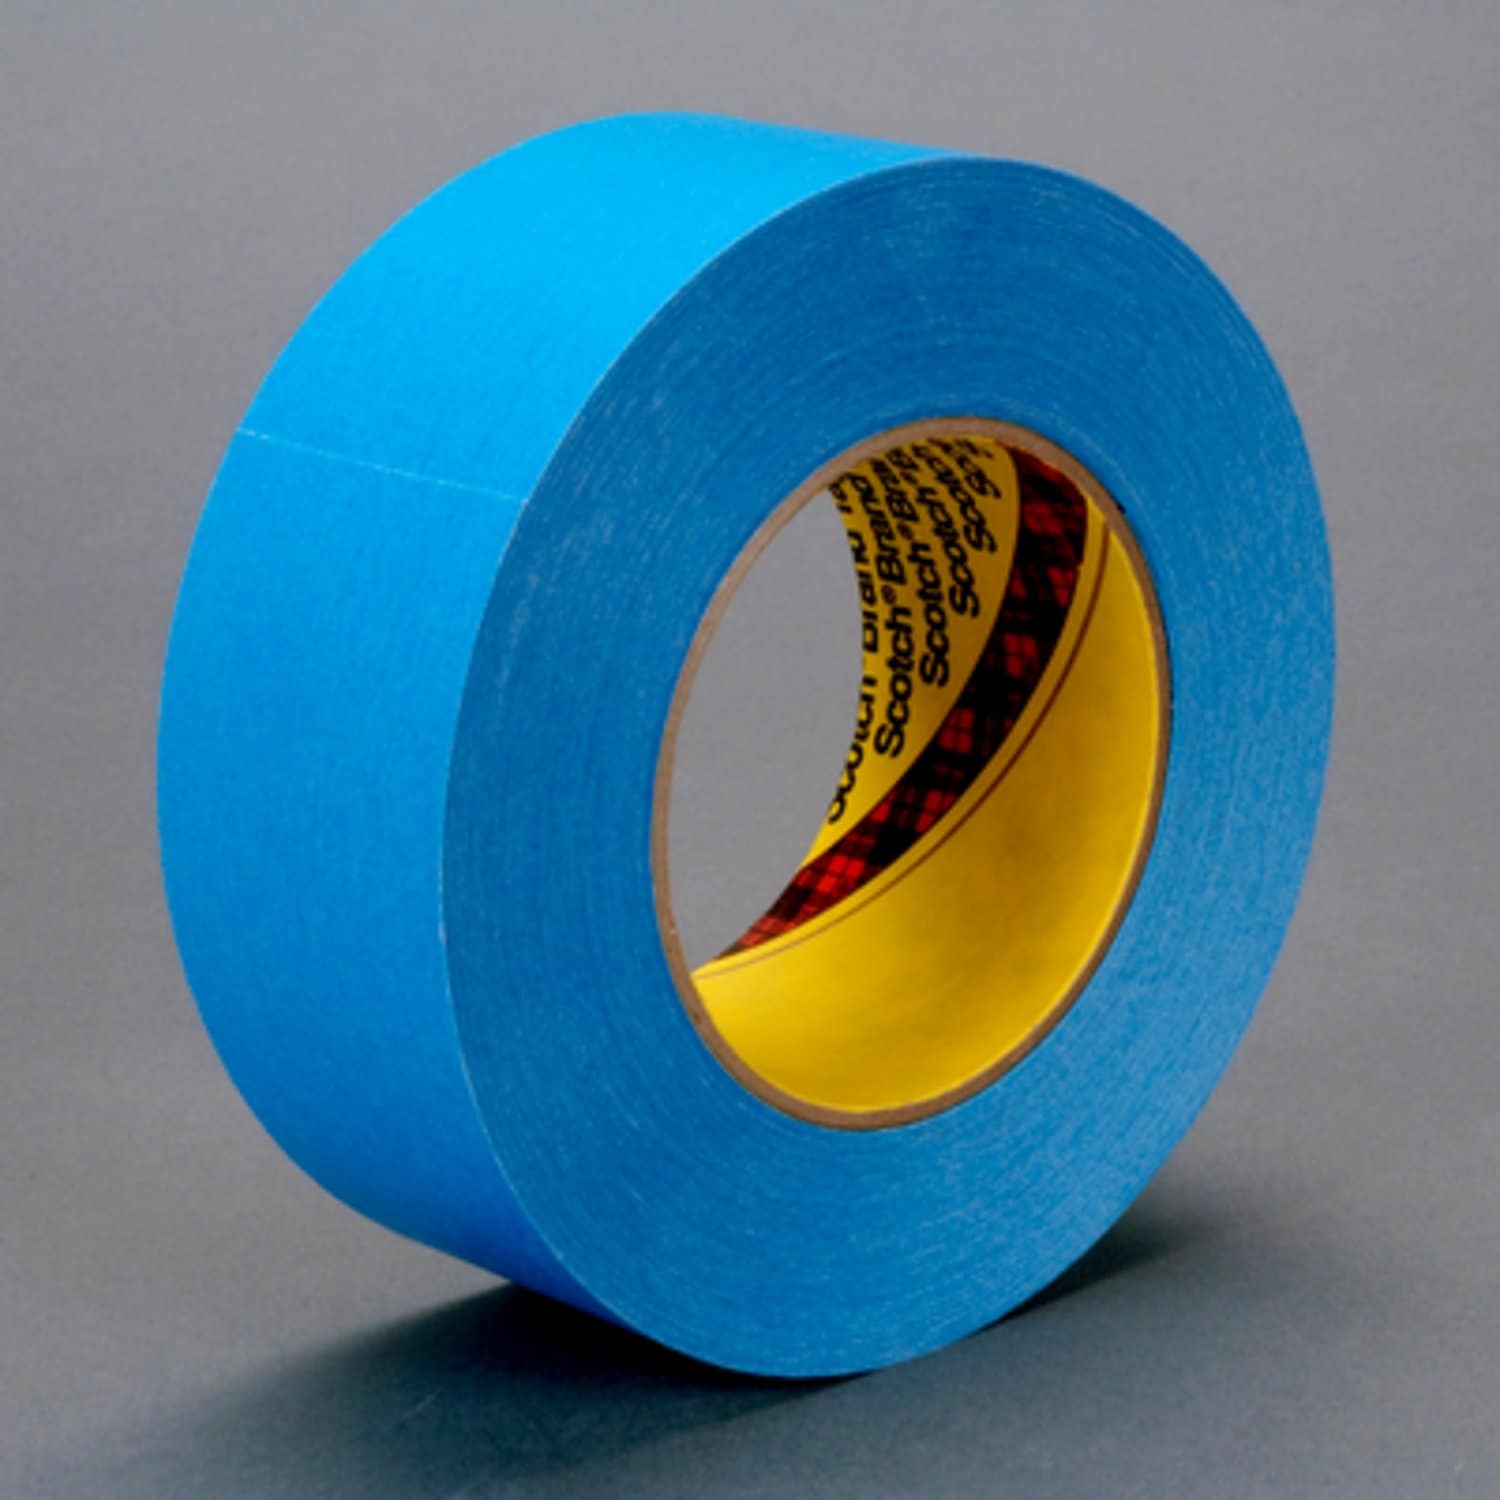 7100013068 - 3M Repulpable Strong Single Coated Tape R3187, Blue, 7.5 mil, Roll,
Config